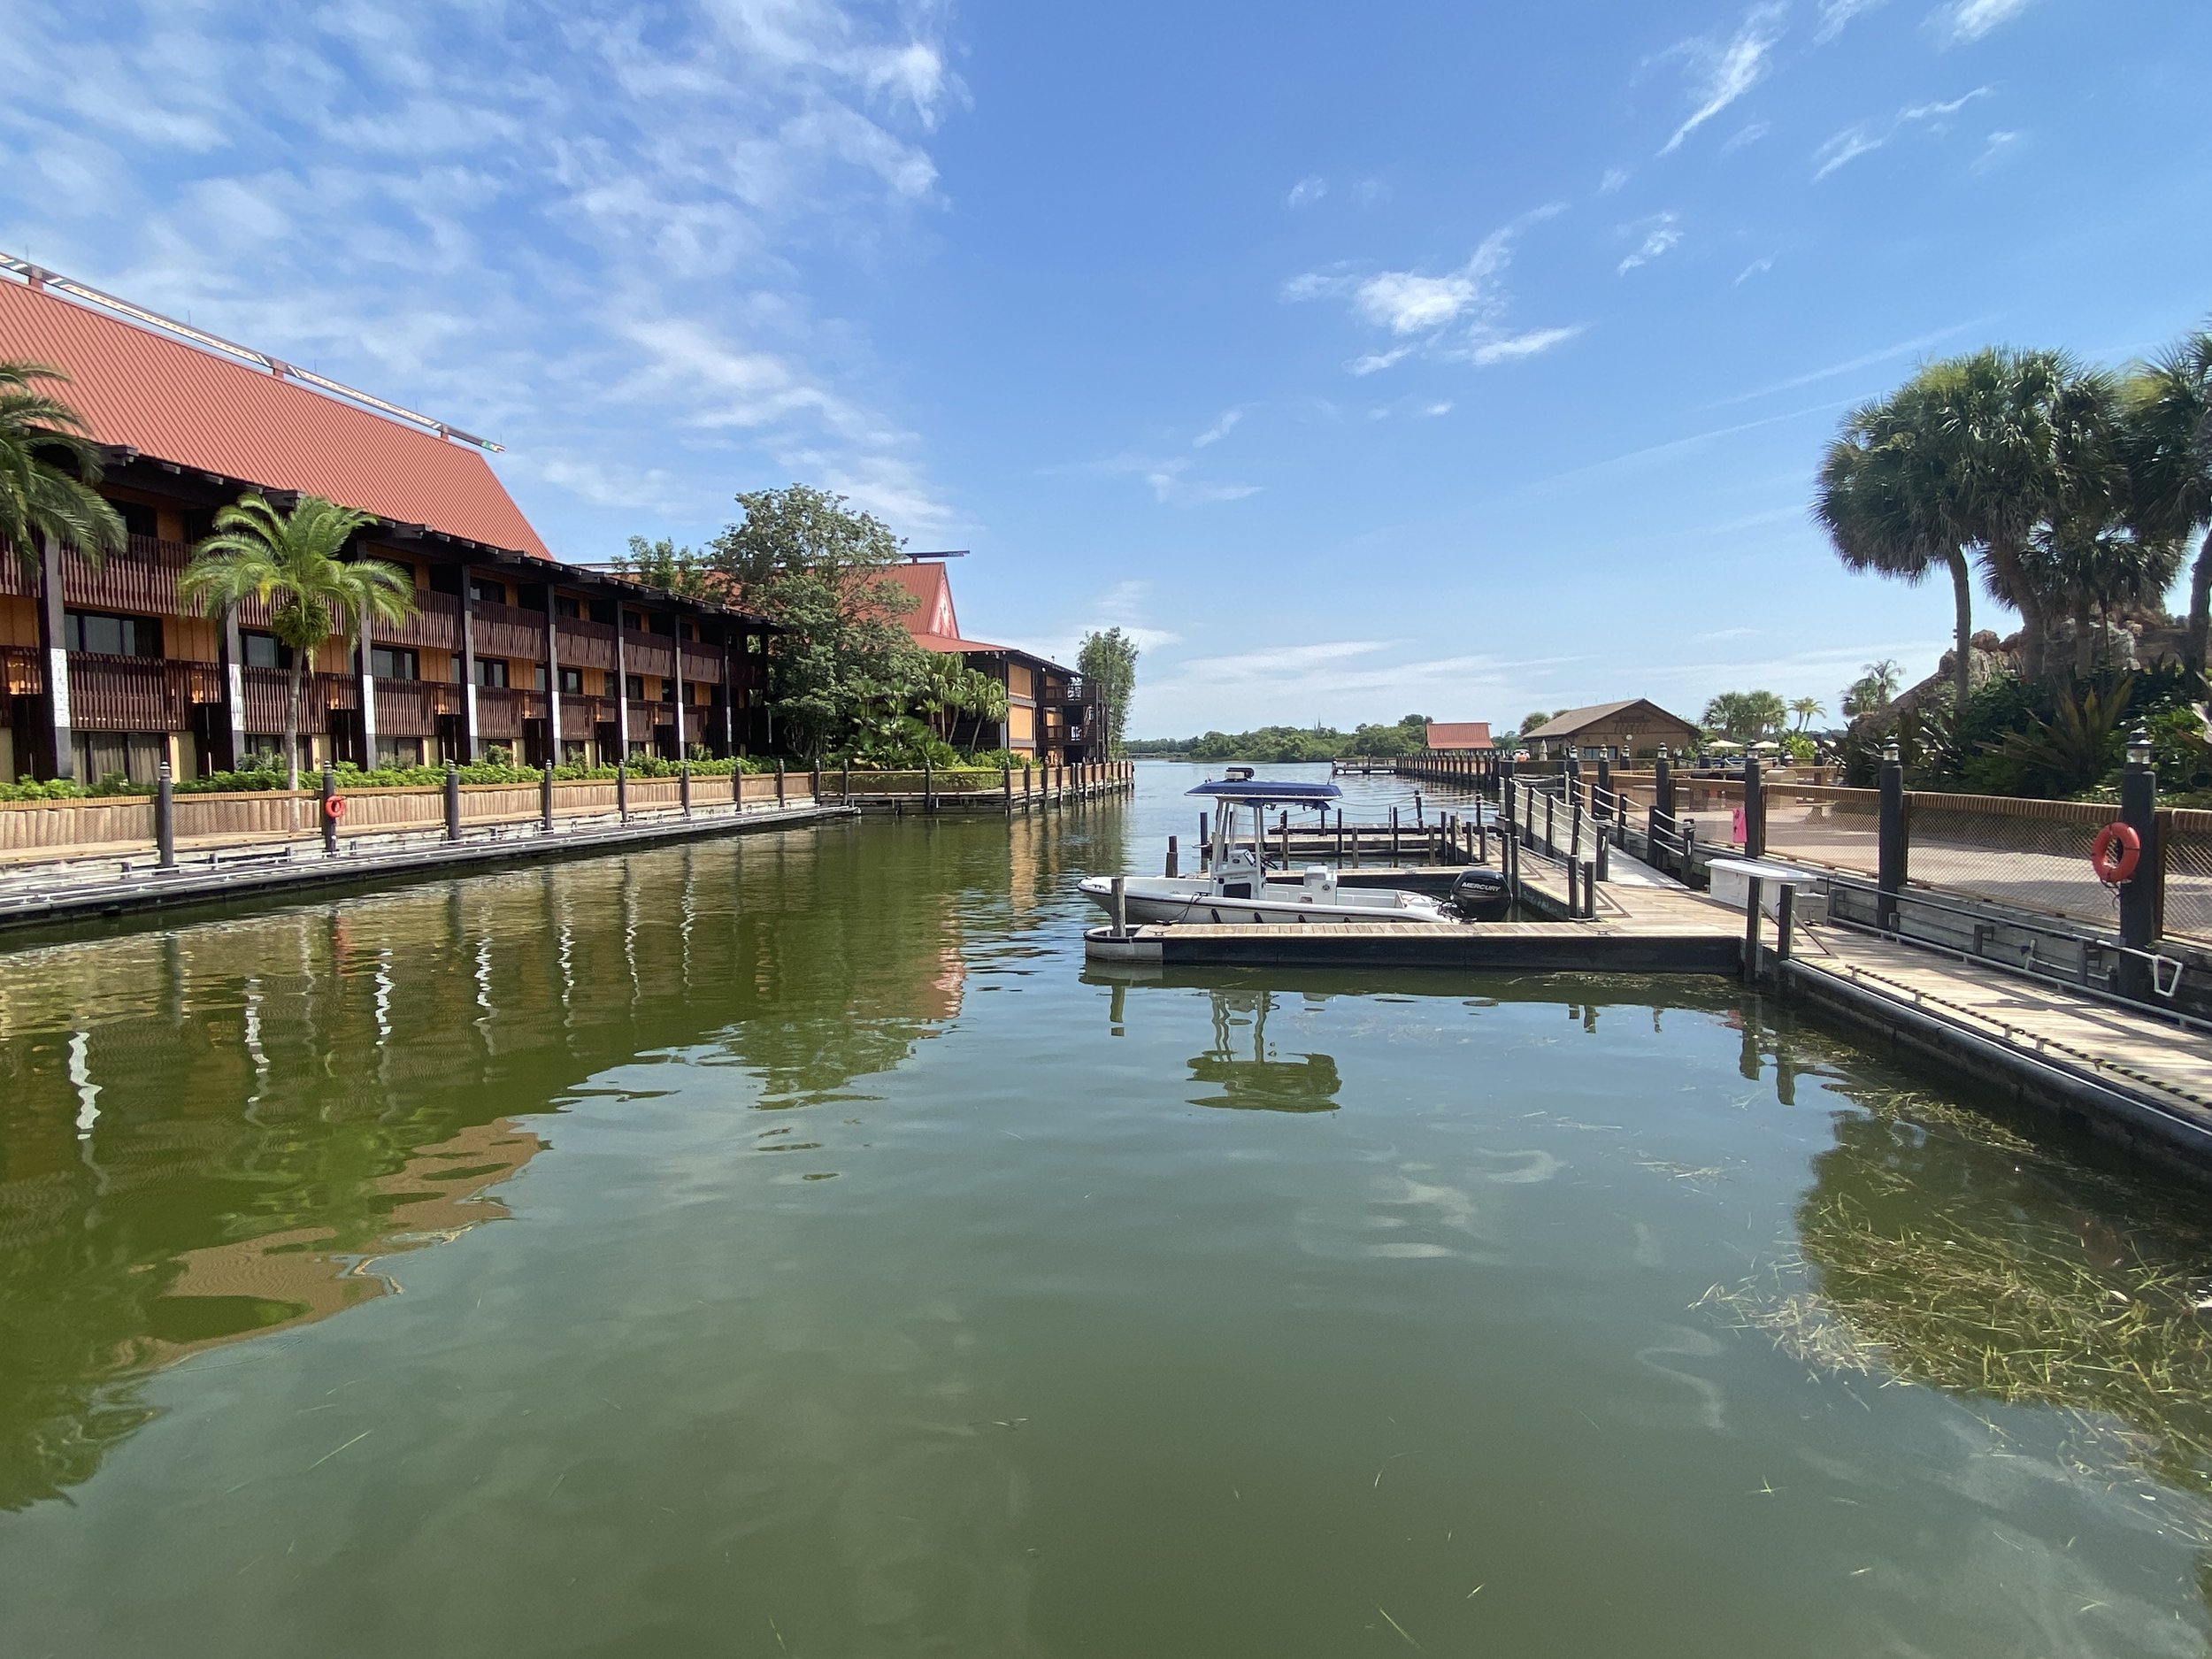  This is the marina at  Disney’s Polynesian Village  resort. The marina has been used in a variety of ways over the years. At one point, this was home to a massive Chinese sailing vessel that sailed the Seven Seas Lagoon. 